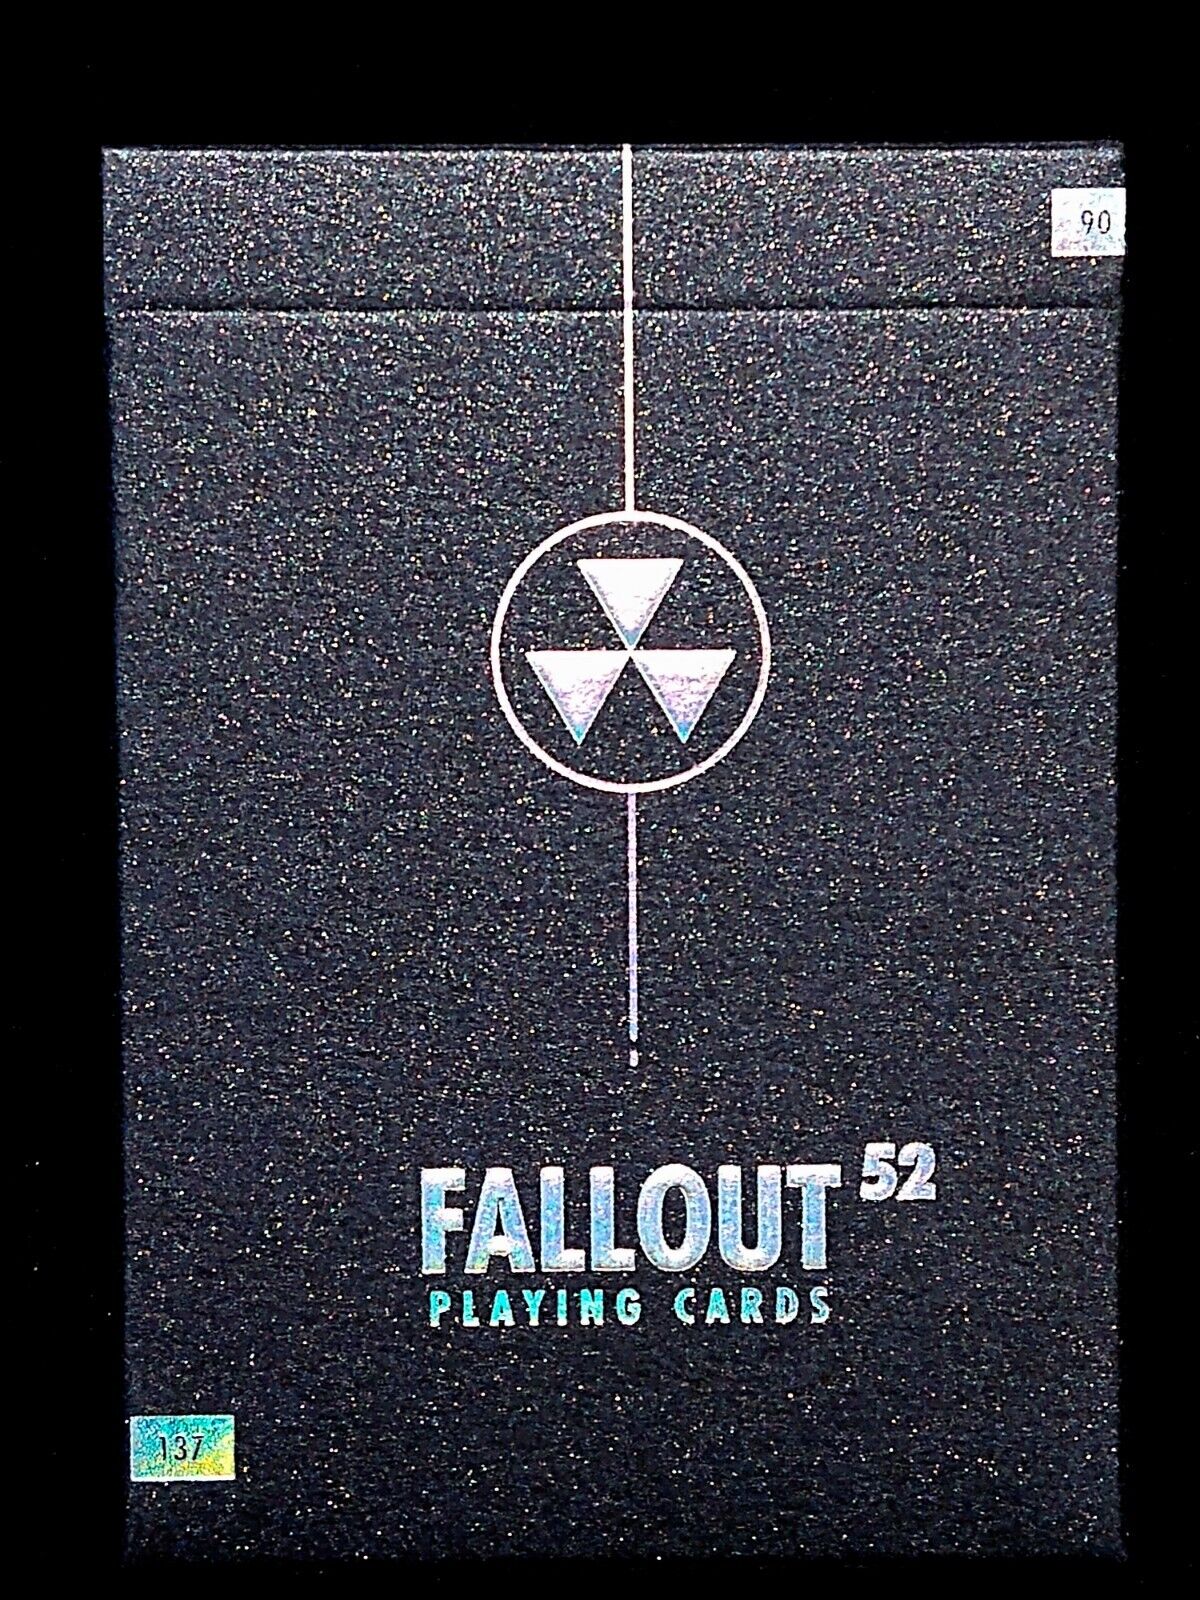 Fallout 52 Limited Edition Playing Card Deck New & Sealed